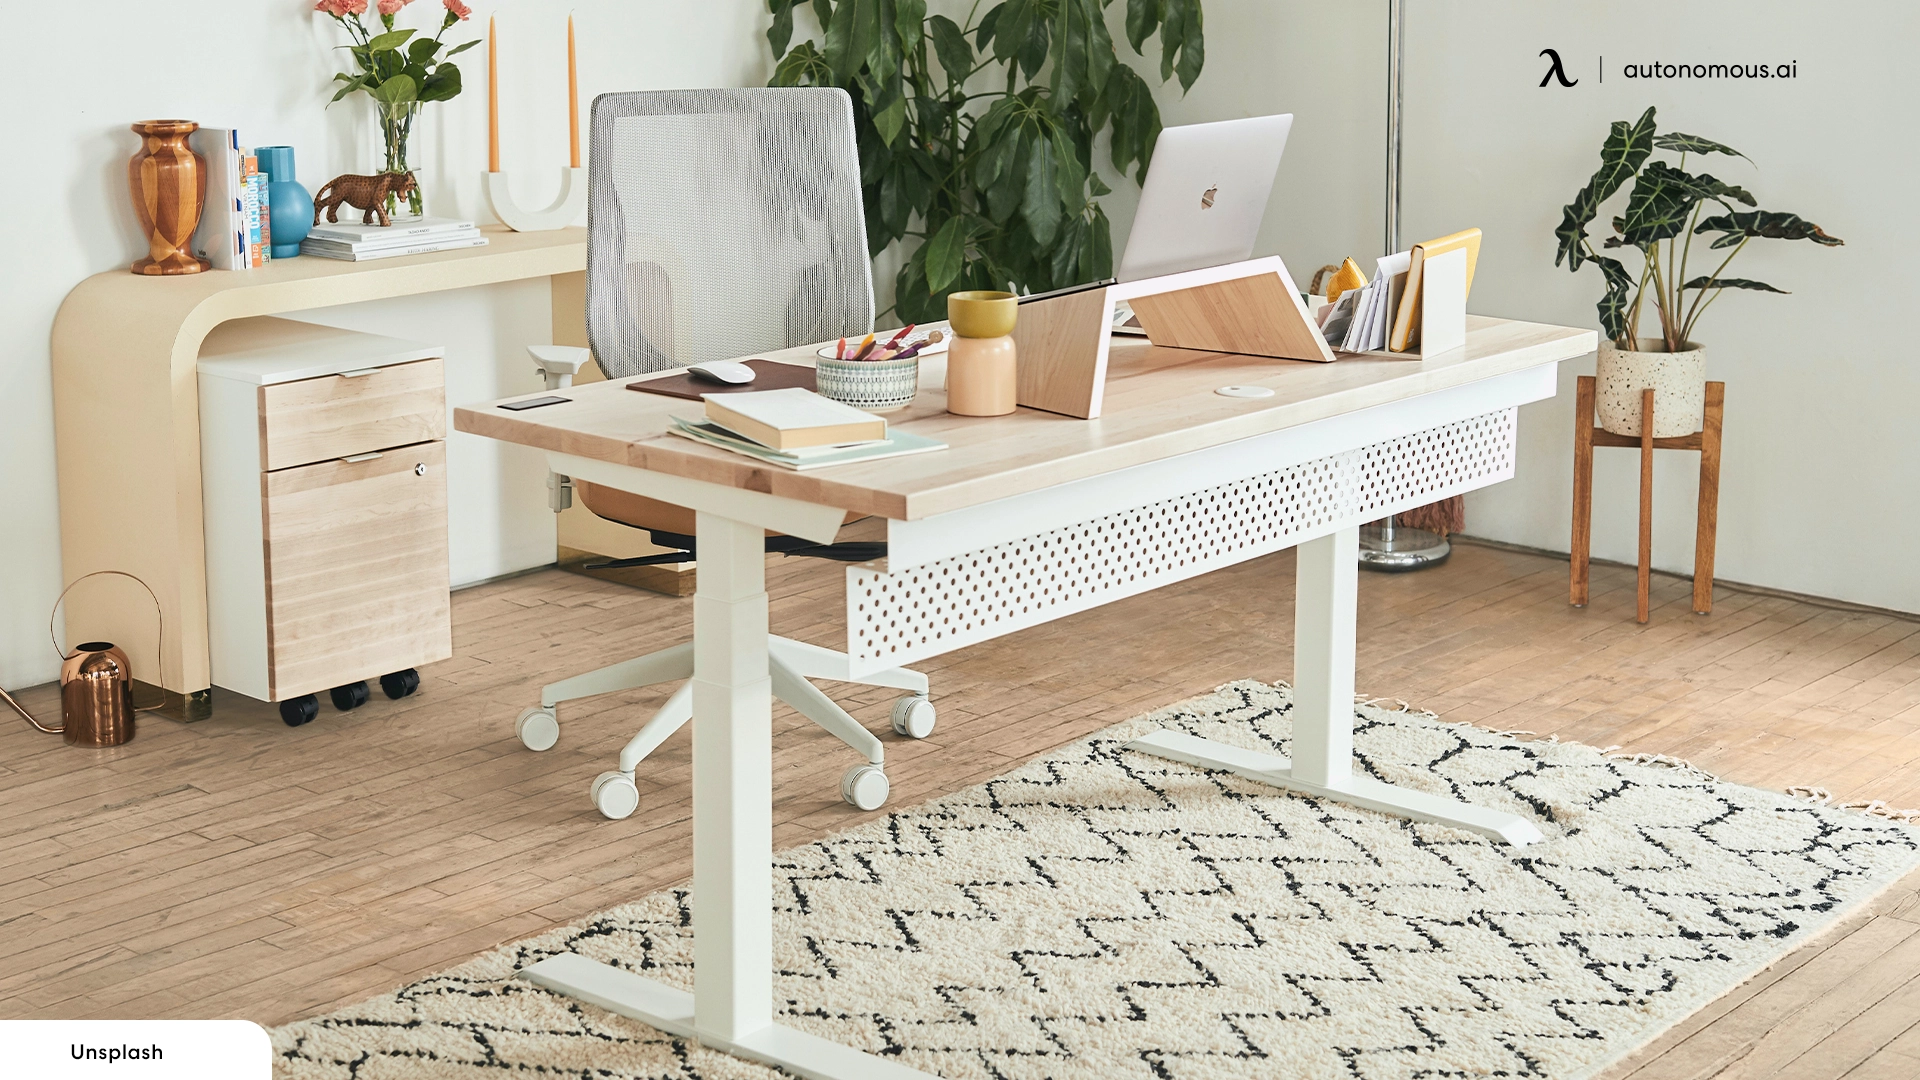 How to Choose the Material, Color, and Pattern for an Office Rug?